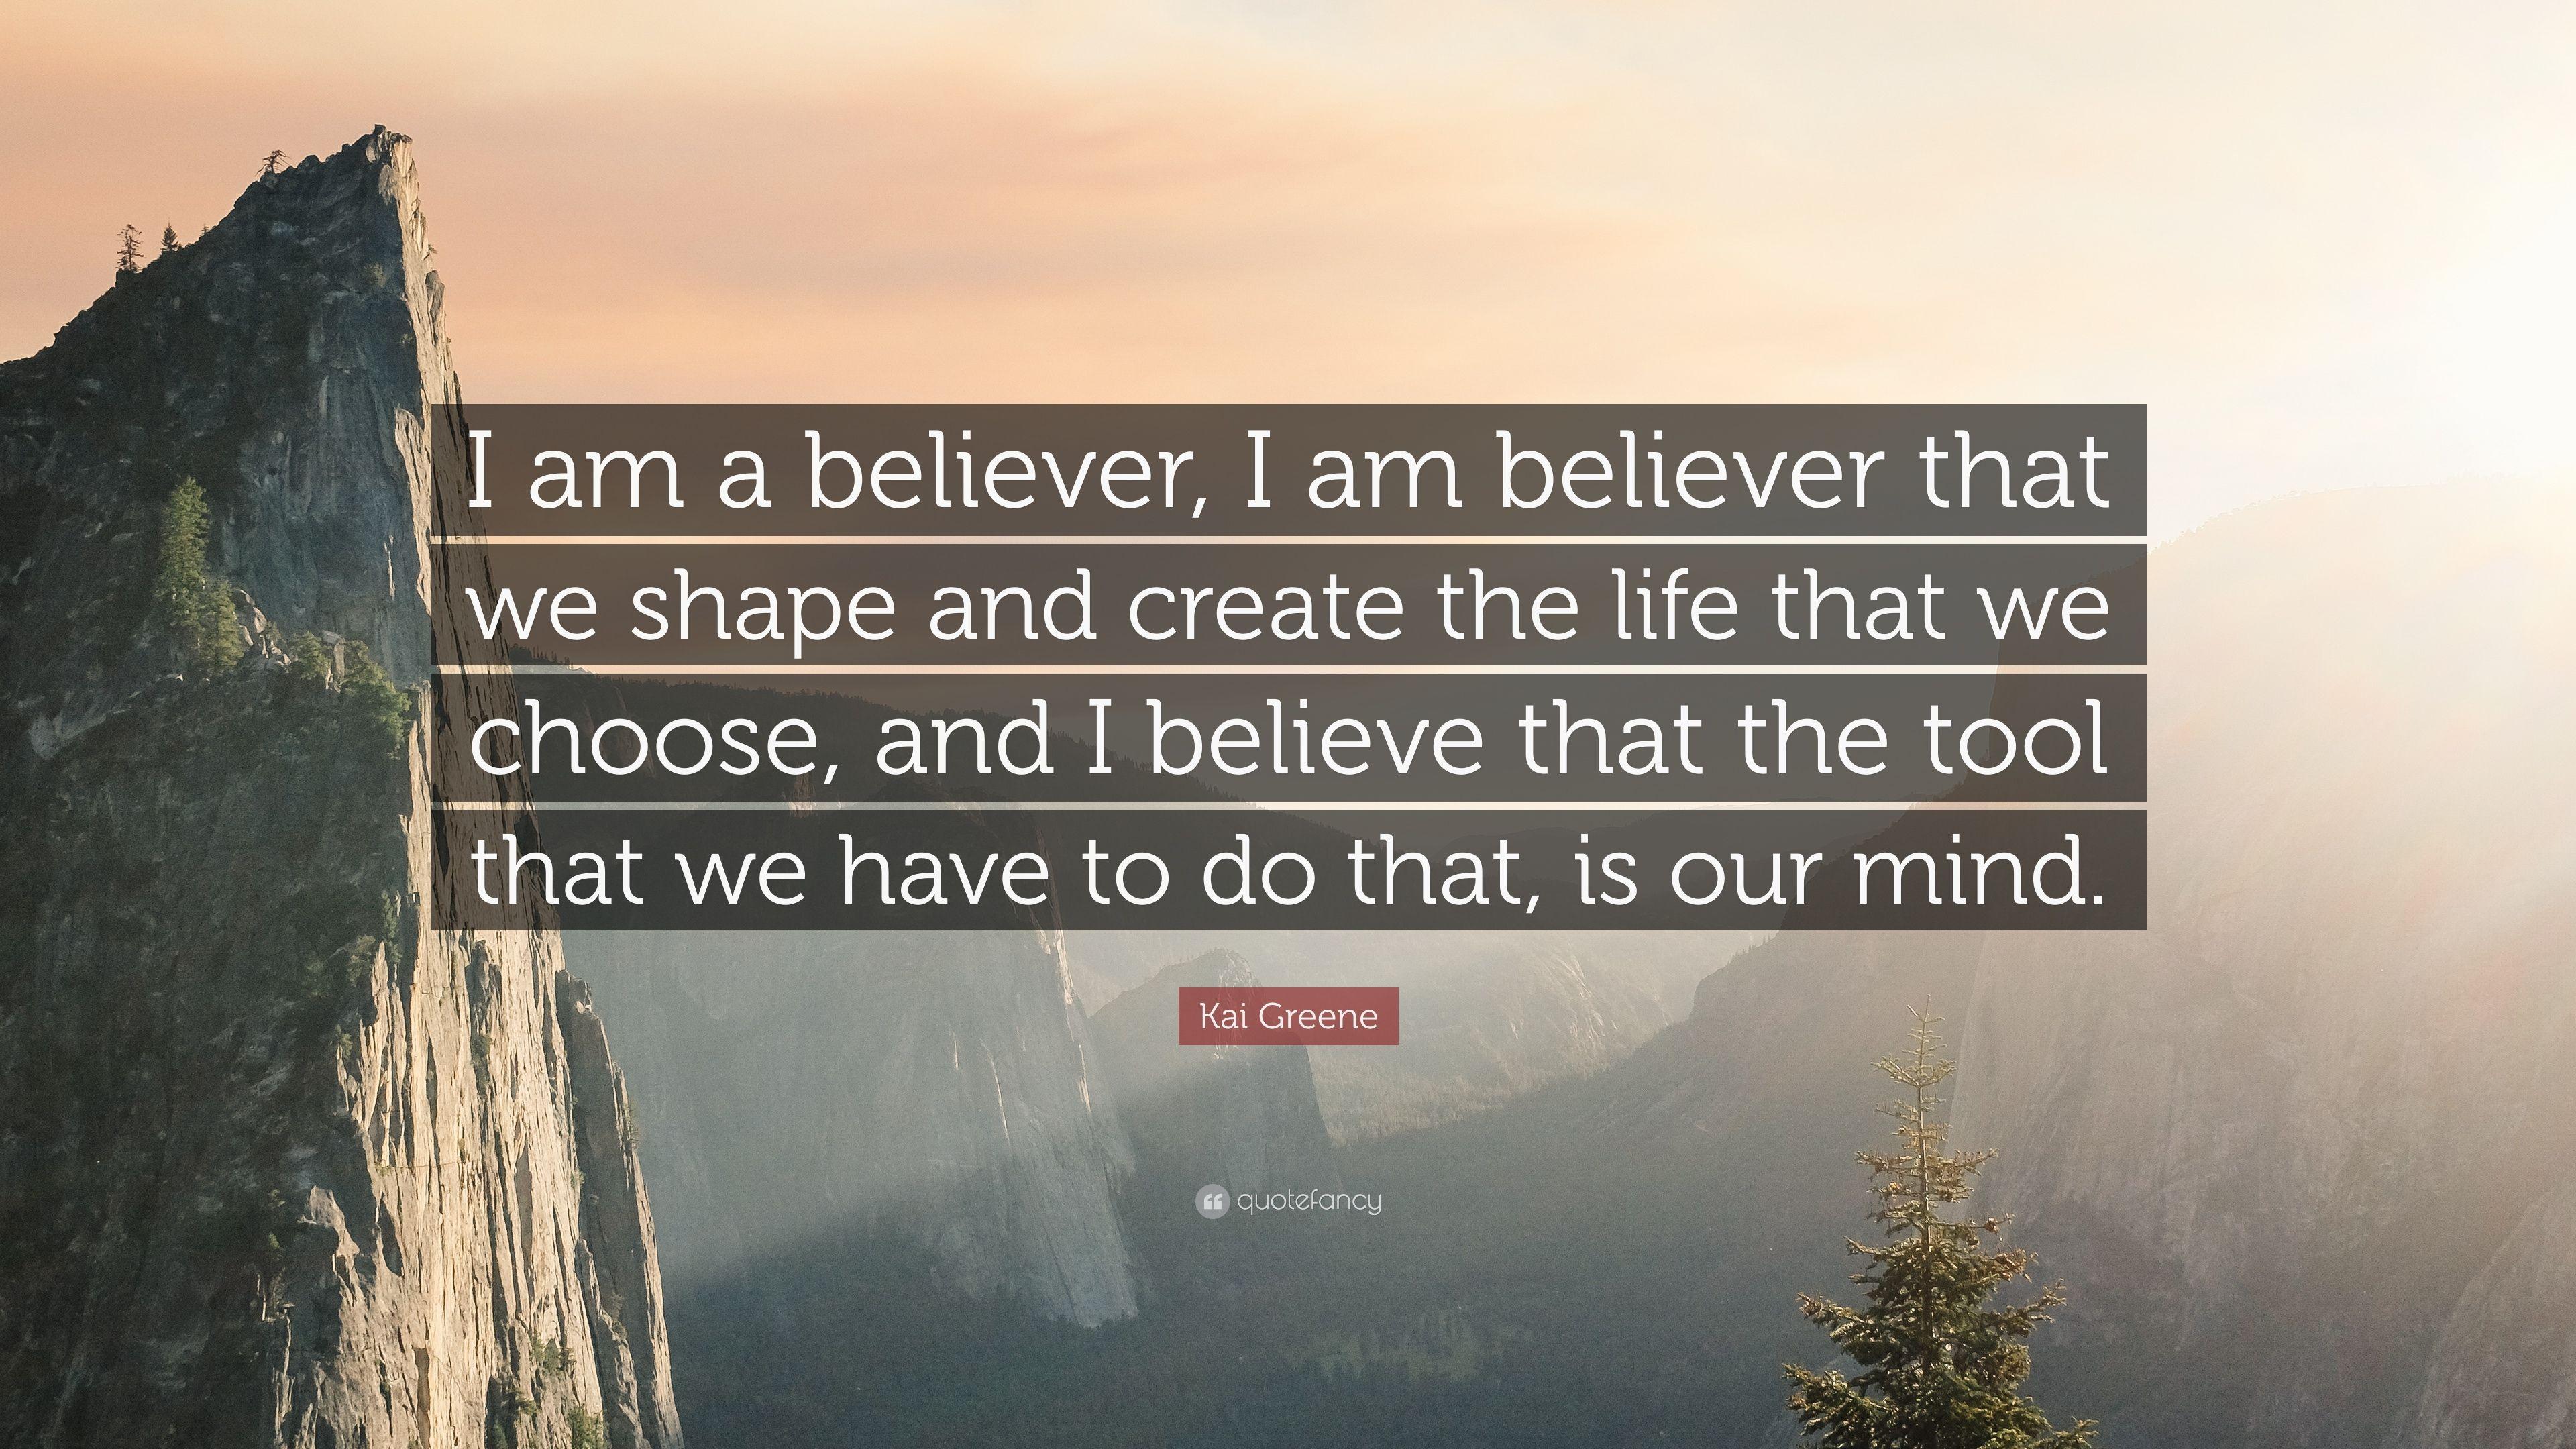 Kai Greene Quote: “I am a believer, I am believer that we shape